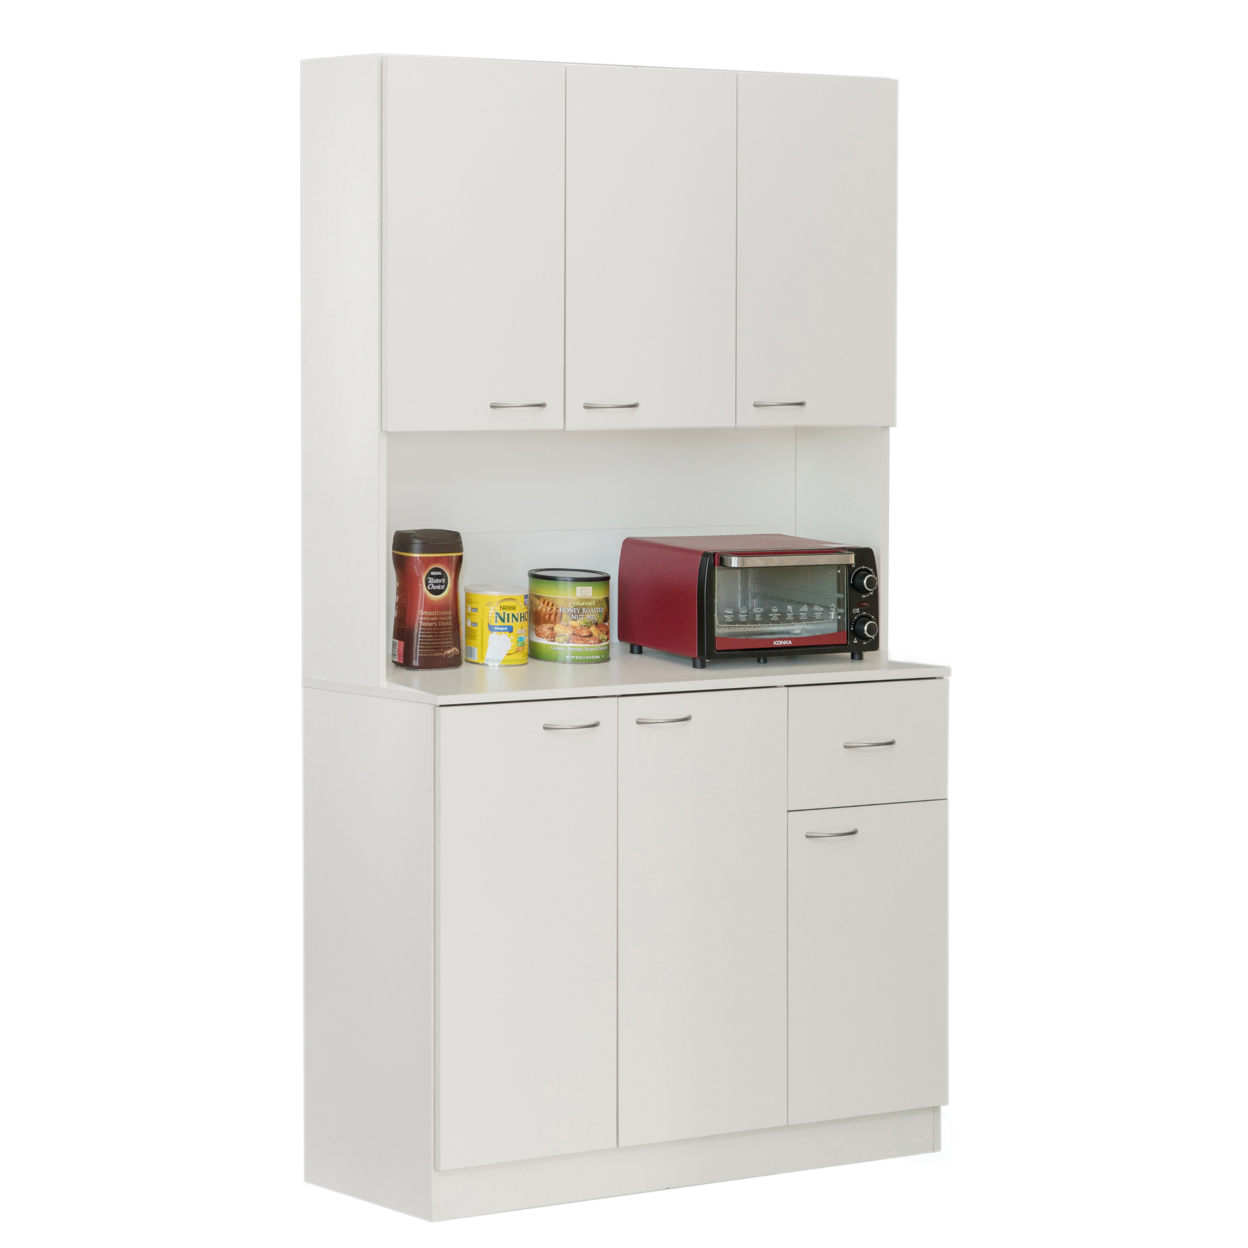 Wooden Kitchen Pantry Storage Cabinet With Drawer, Doors And Shelves, White